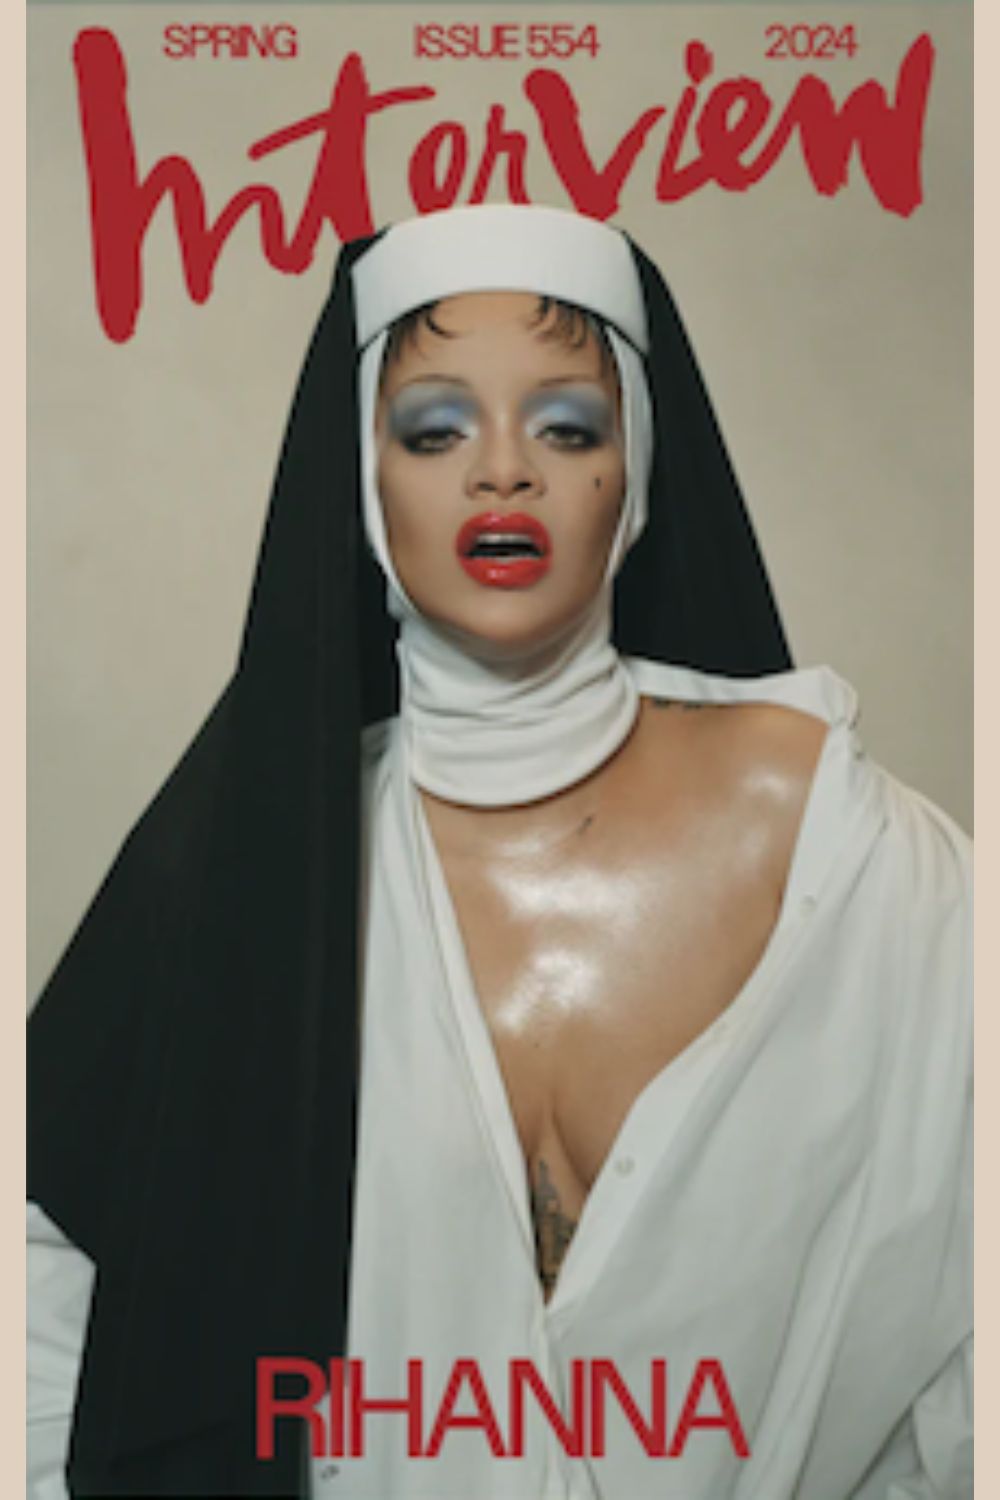 Interview #554 cover with Rihanna